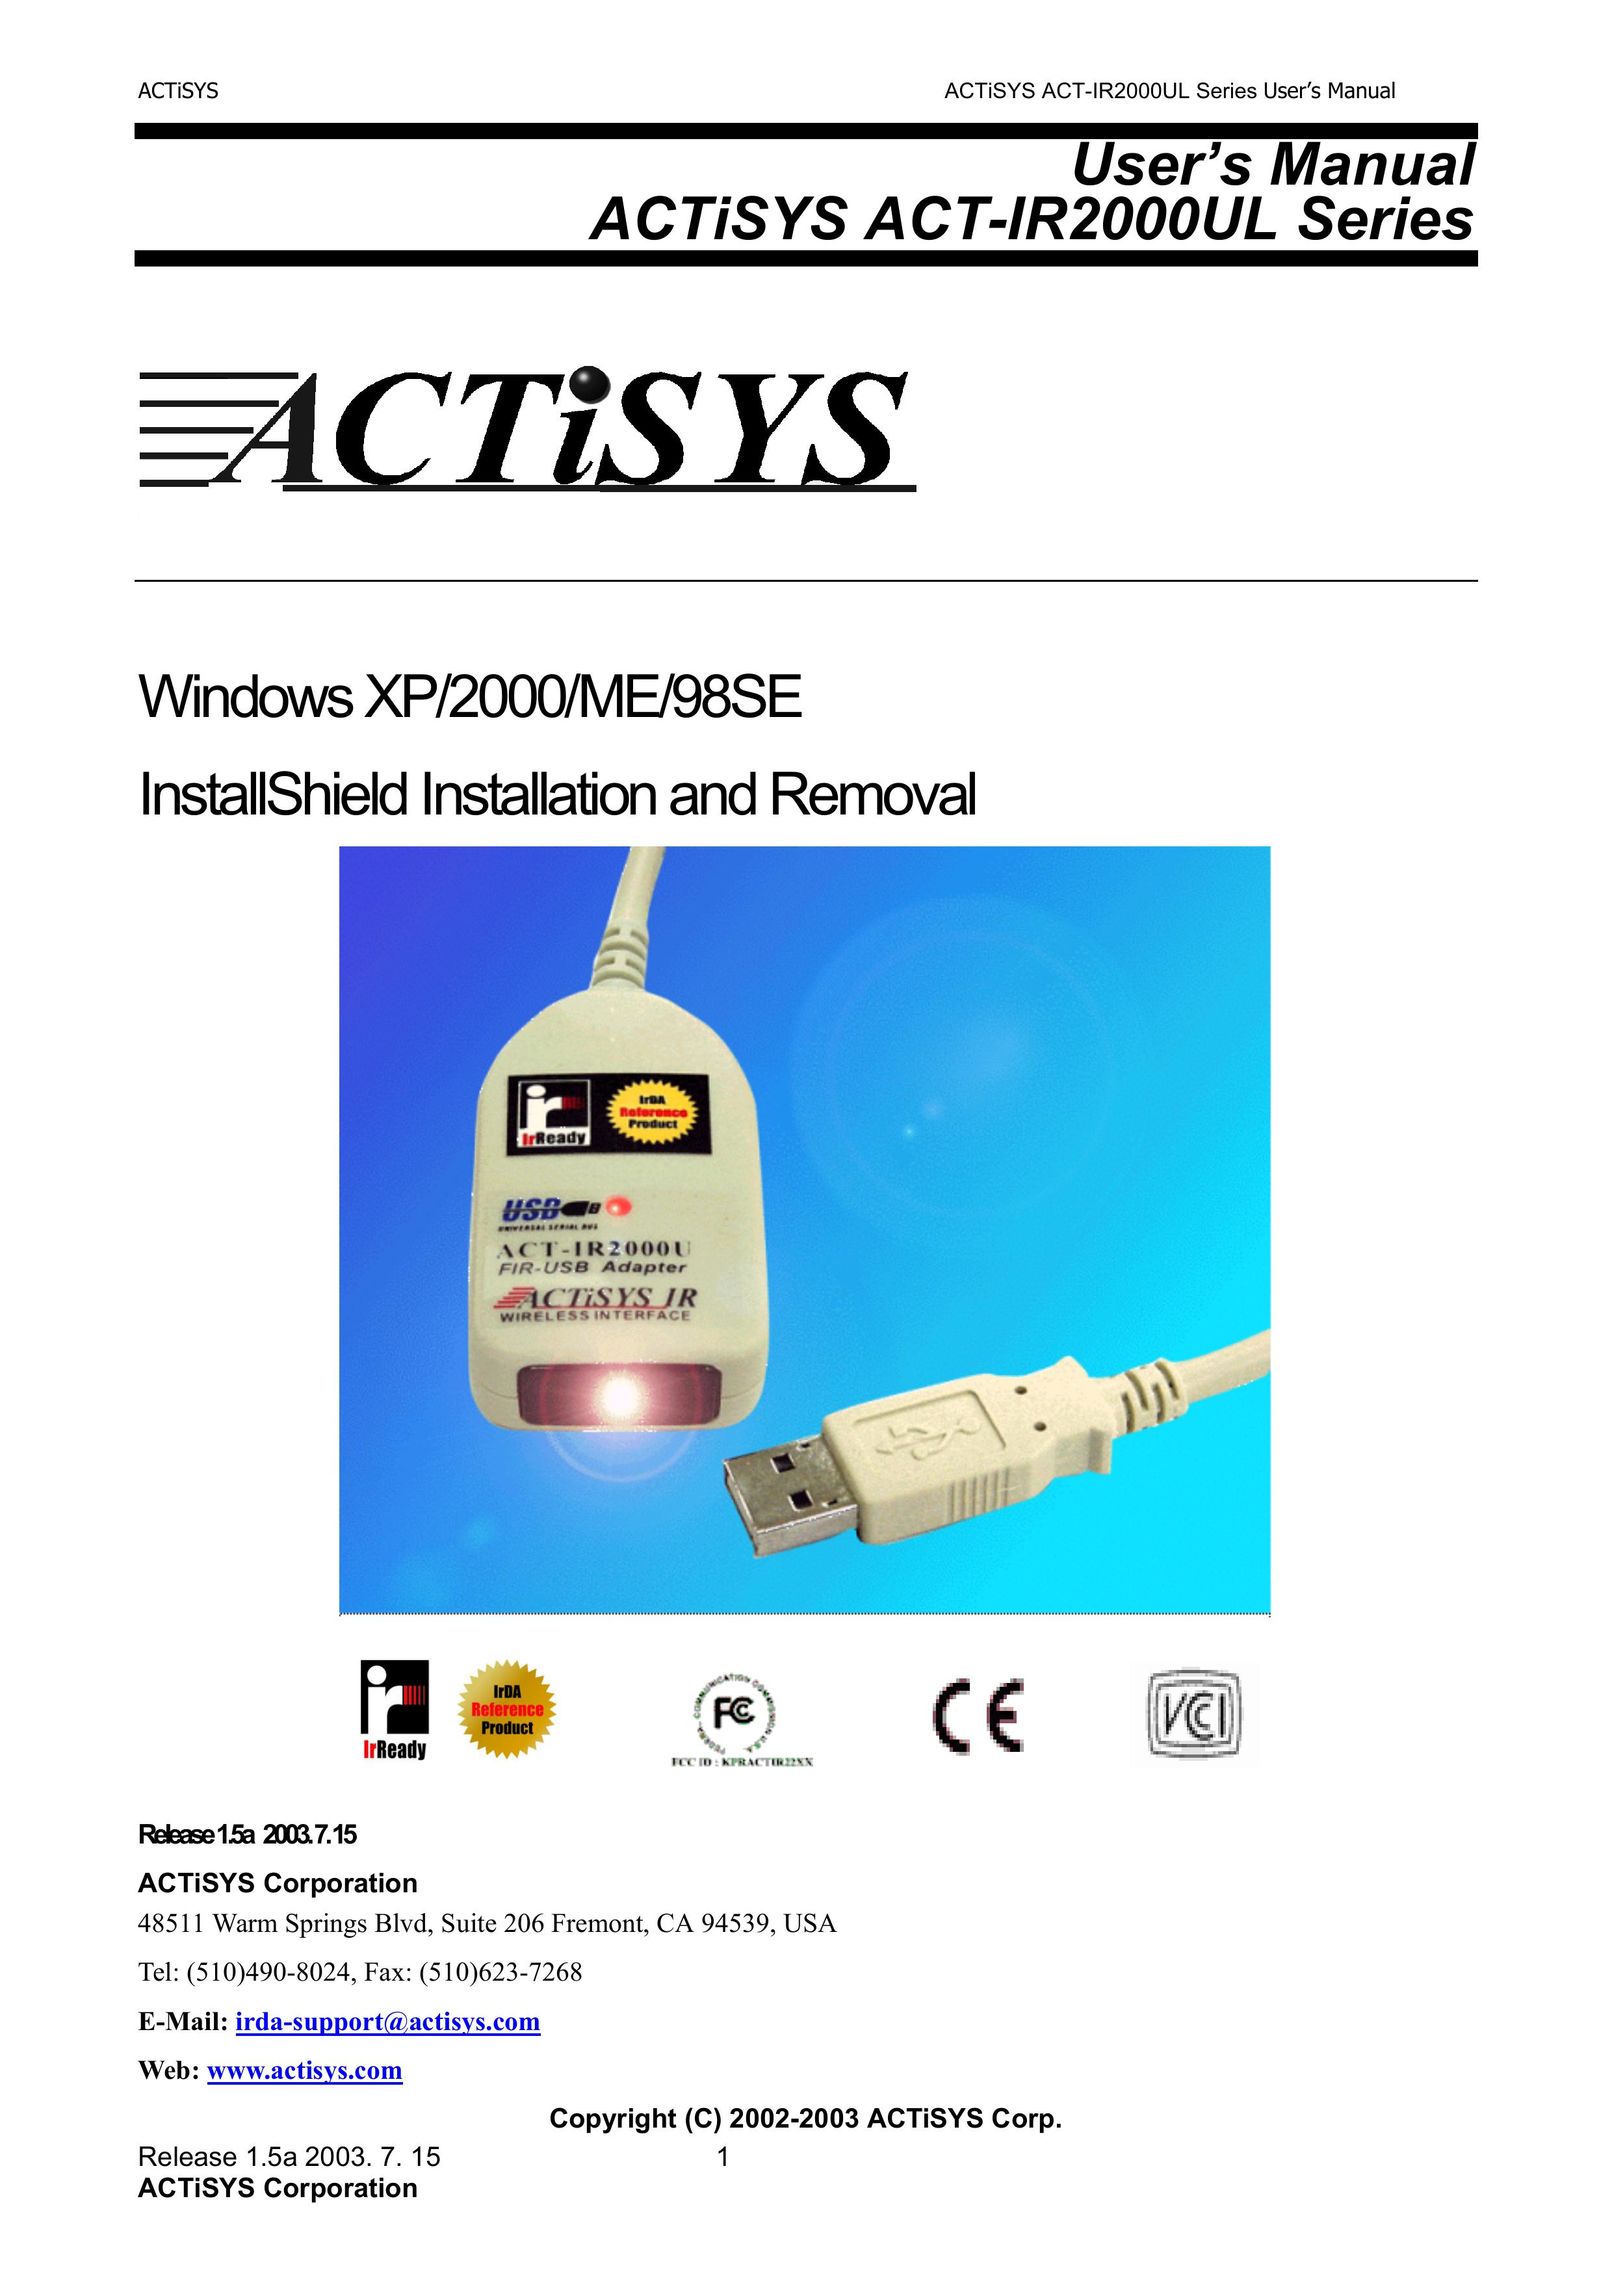 ACTiSYS Fast Infrared USB Adapter Computer Accessories User Manual